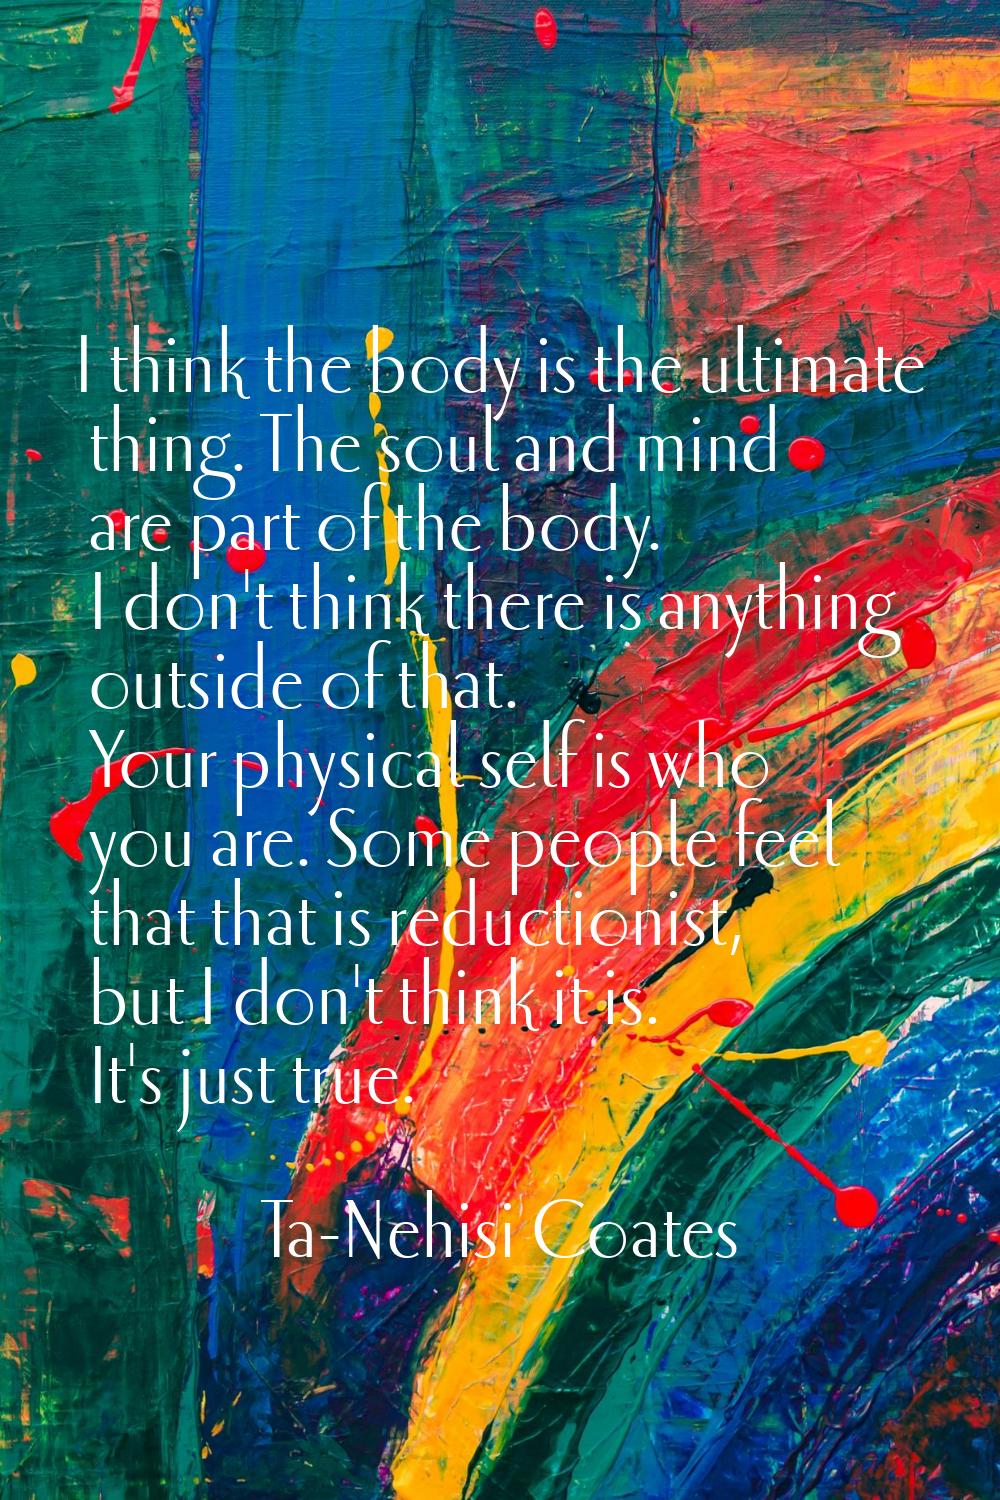 I think the body is the ultimate thing. The soul and mind are part of the body. I don't think there